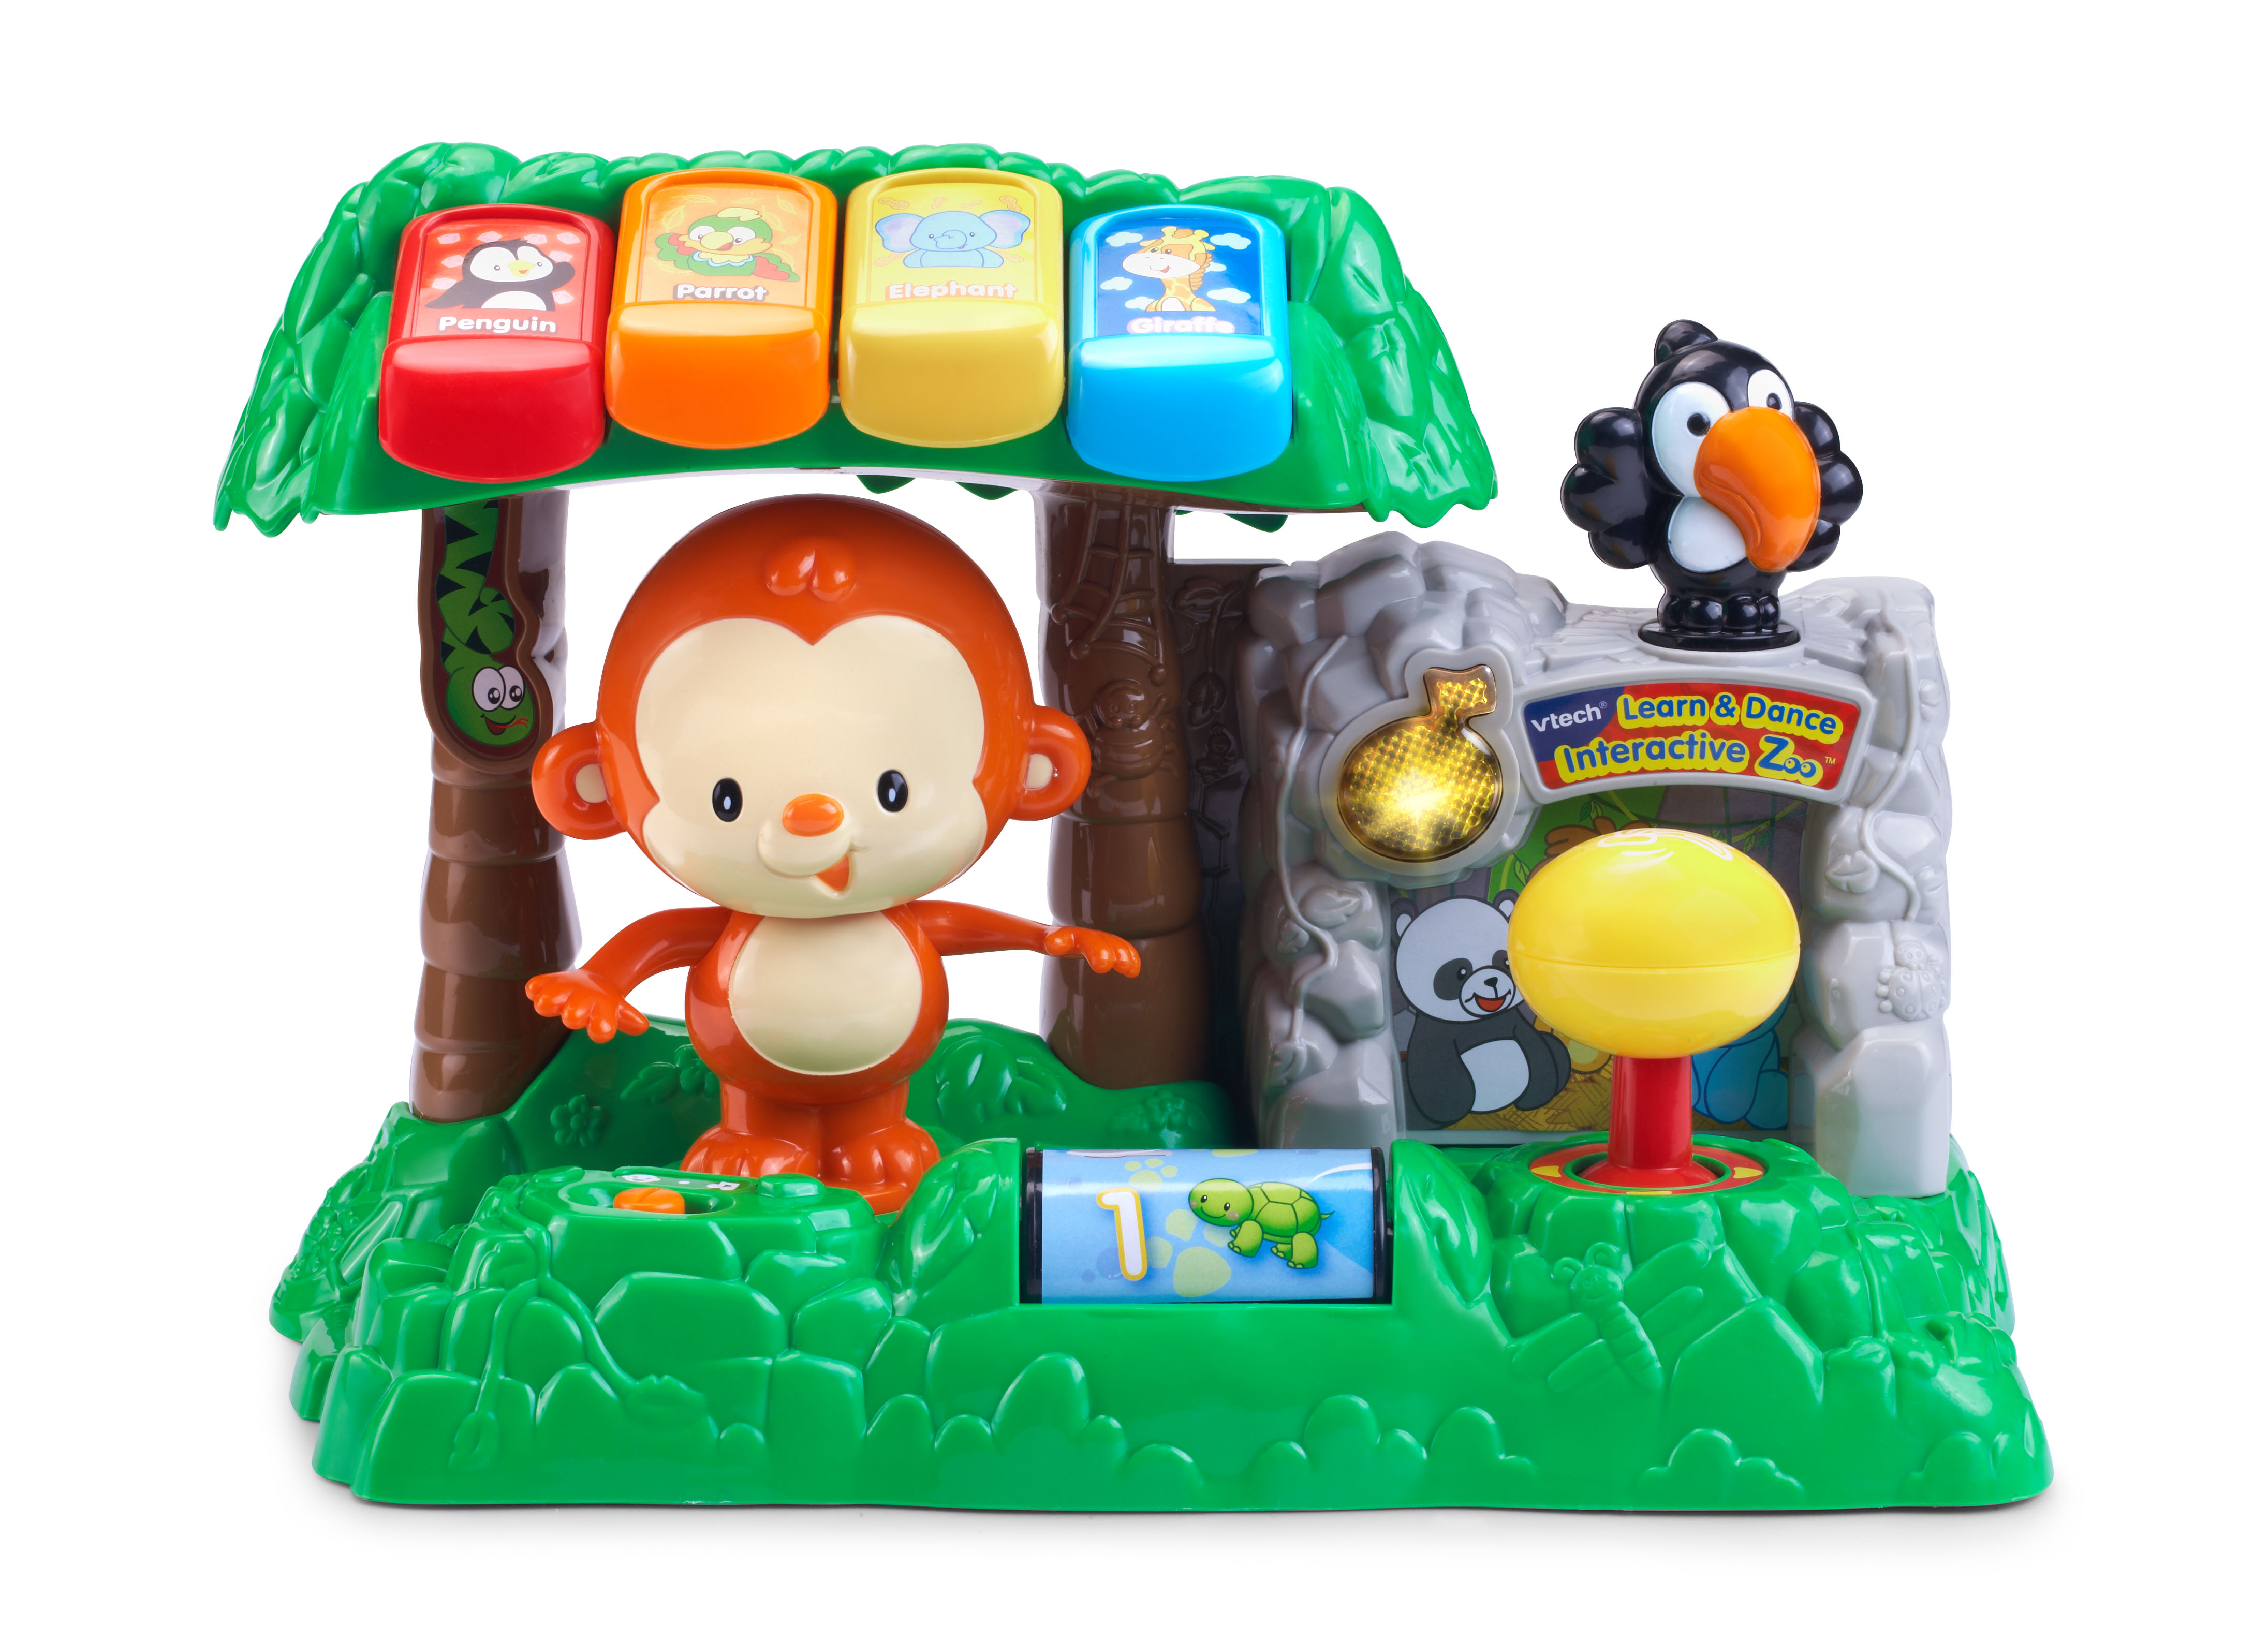 VTech Learn and Dance Interactive Zoo, Fun Teaching Toy for Toddlers - image 1 of 6